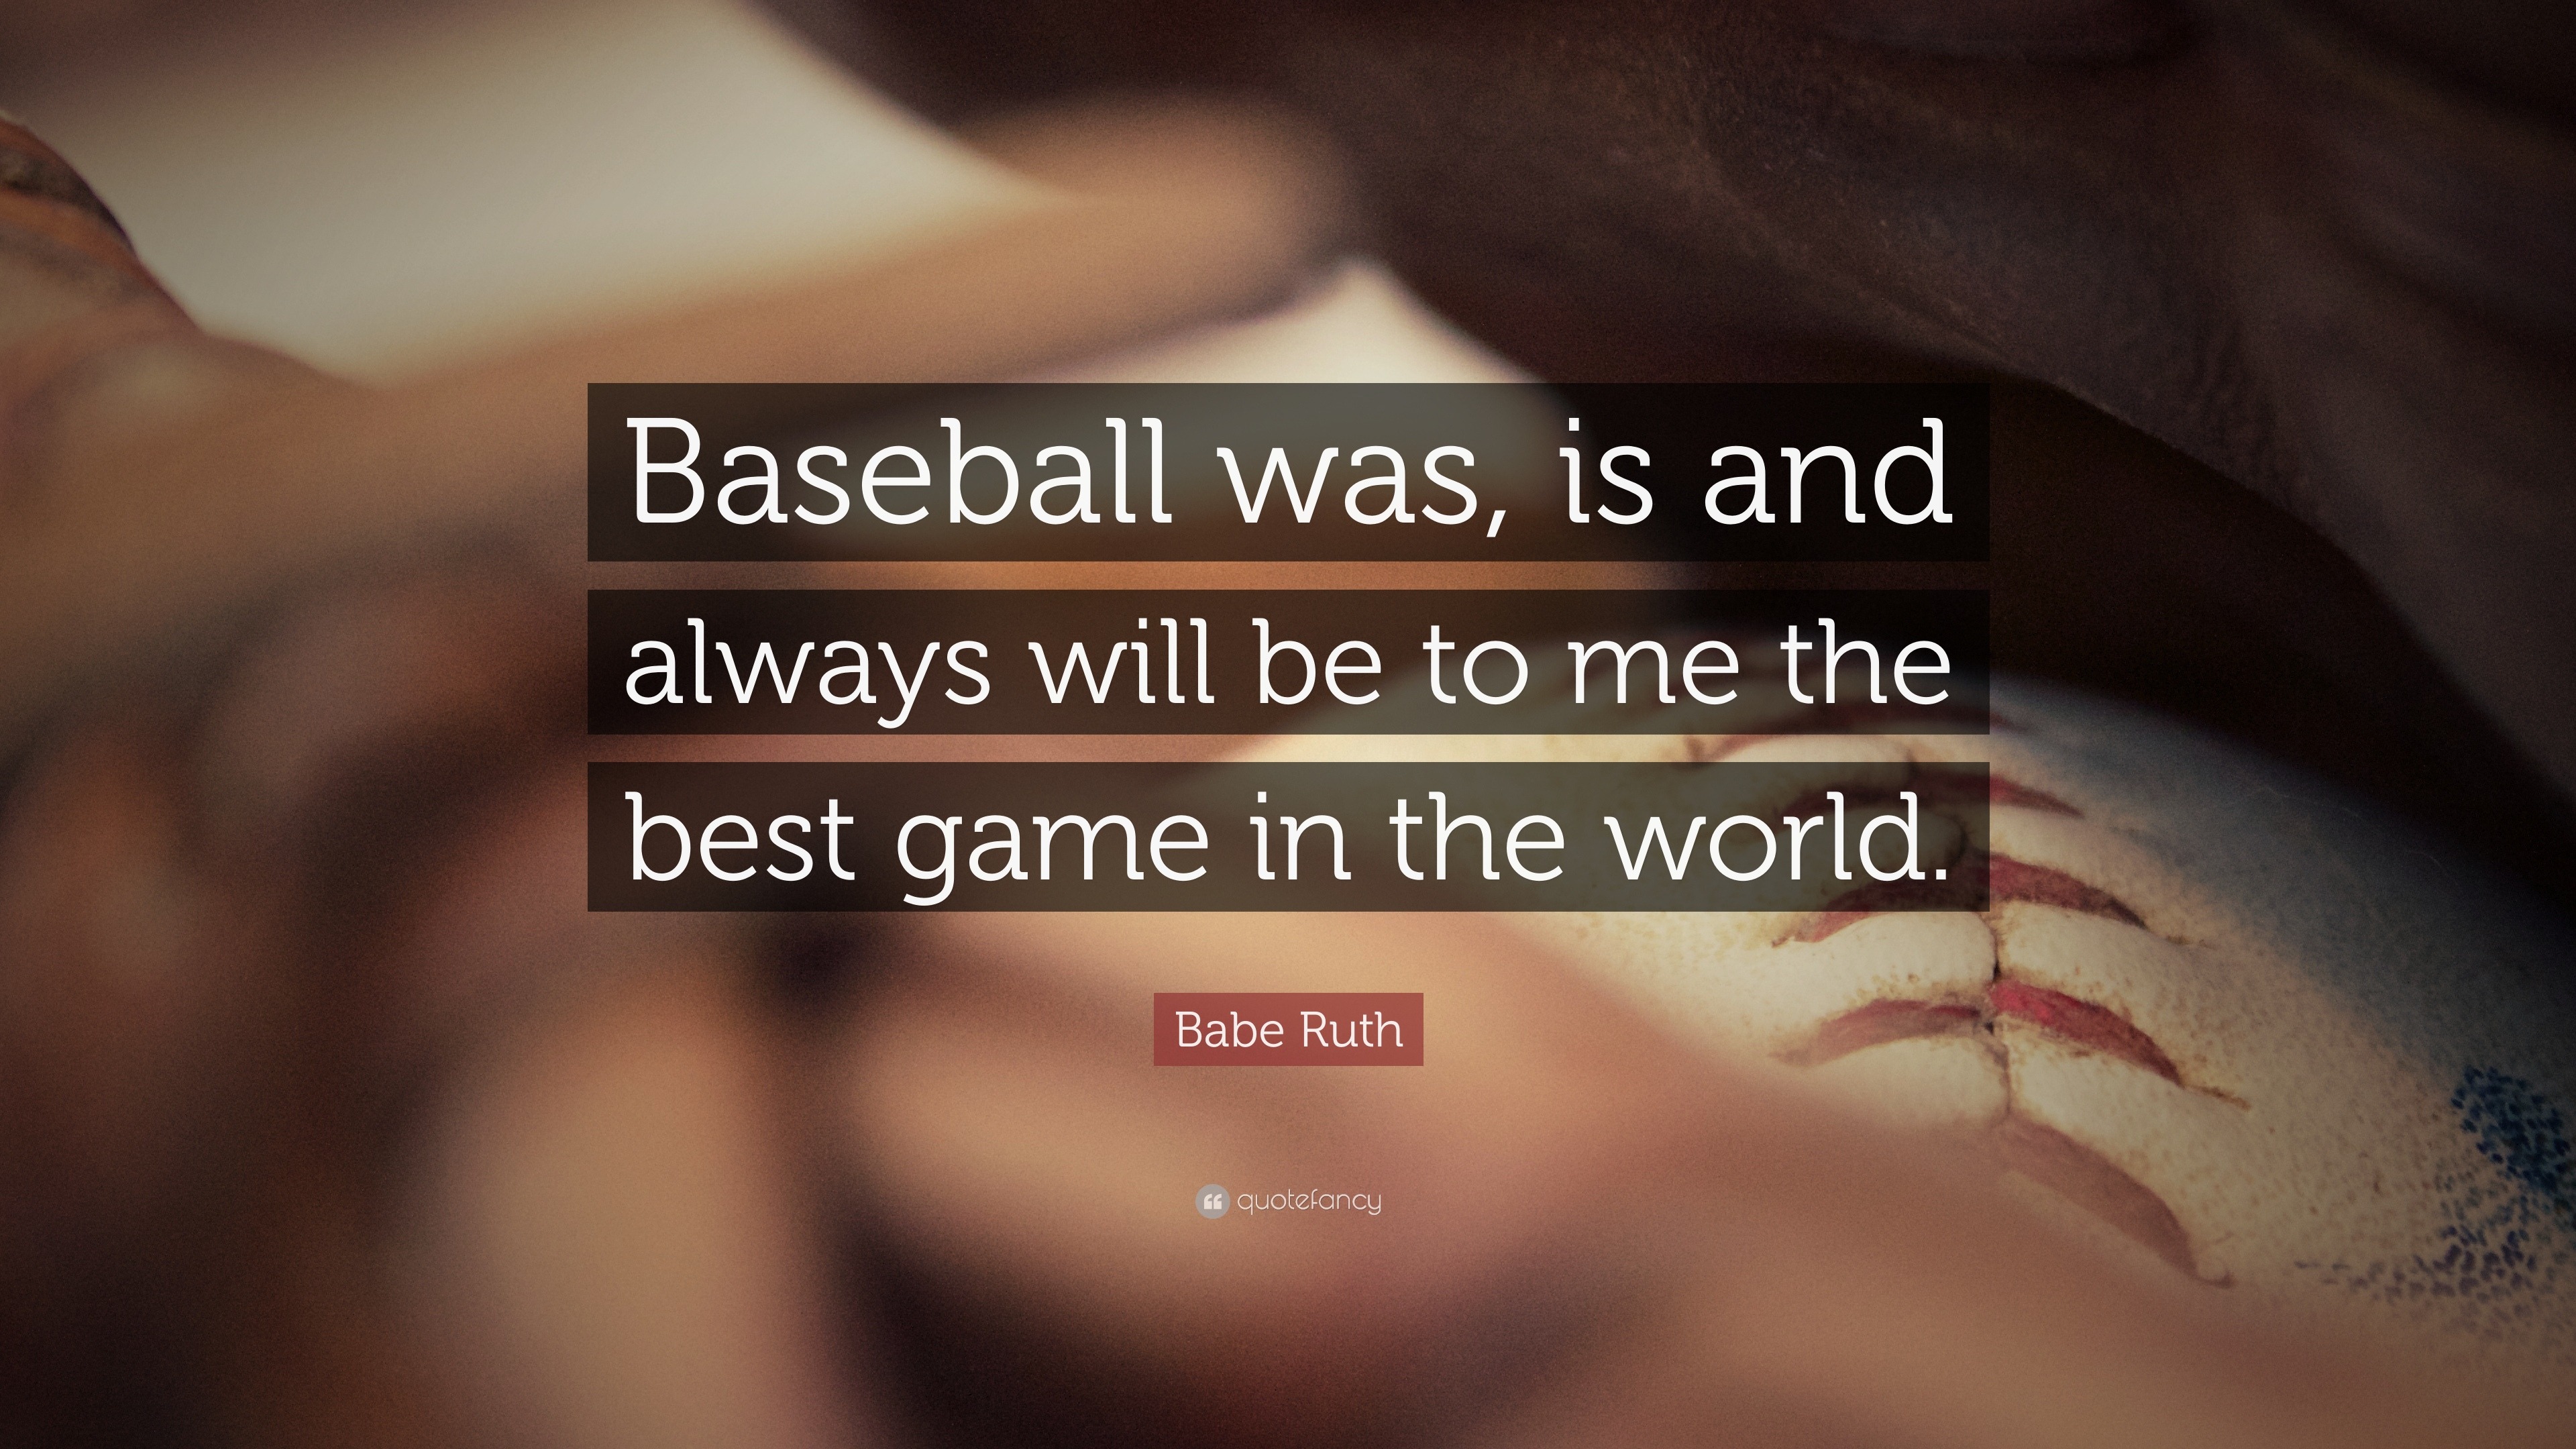 Babe Ruth Baseball Quote Poster